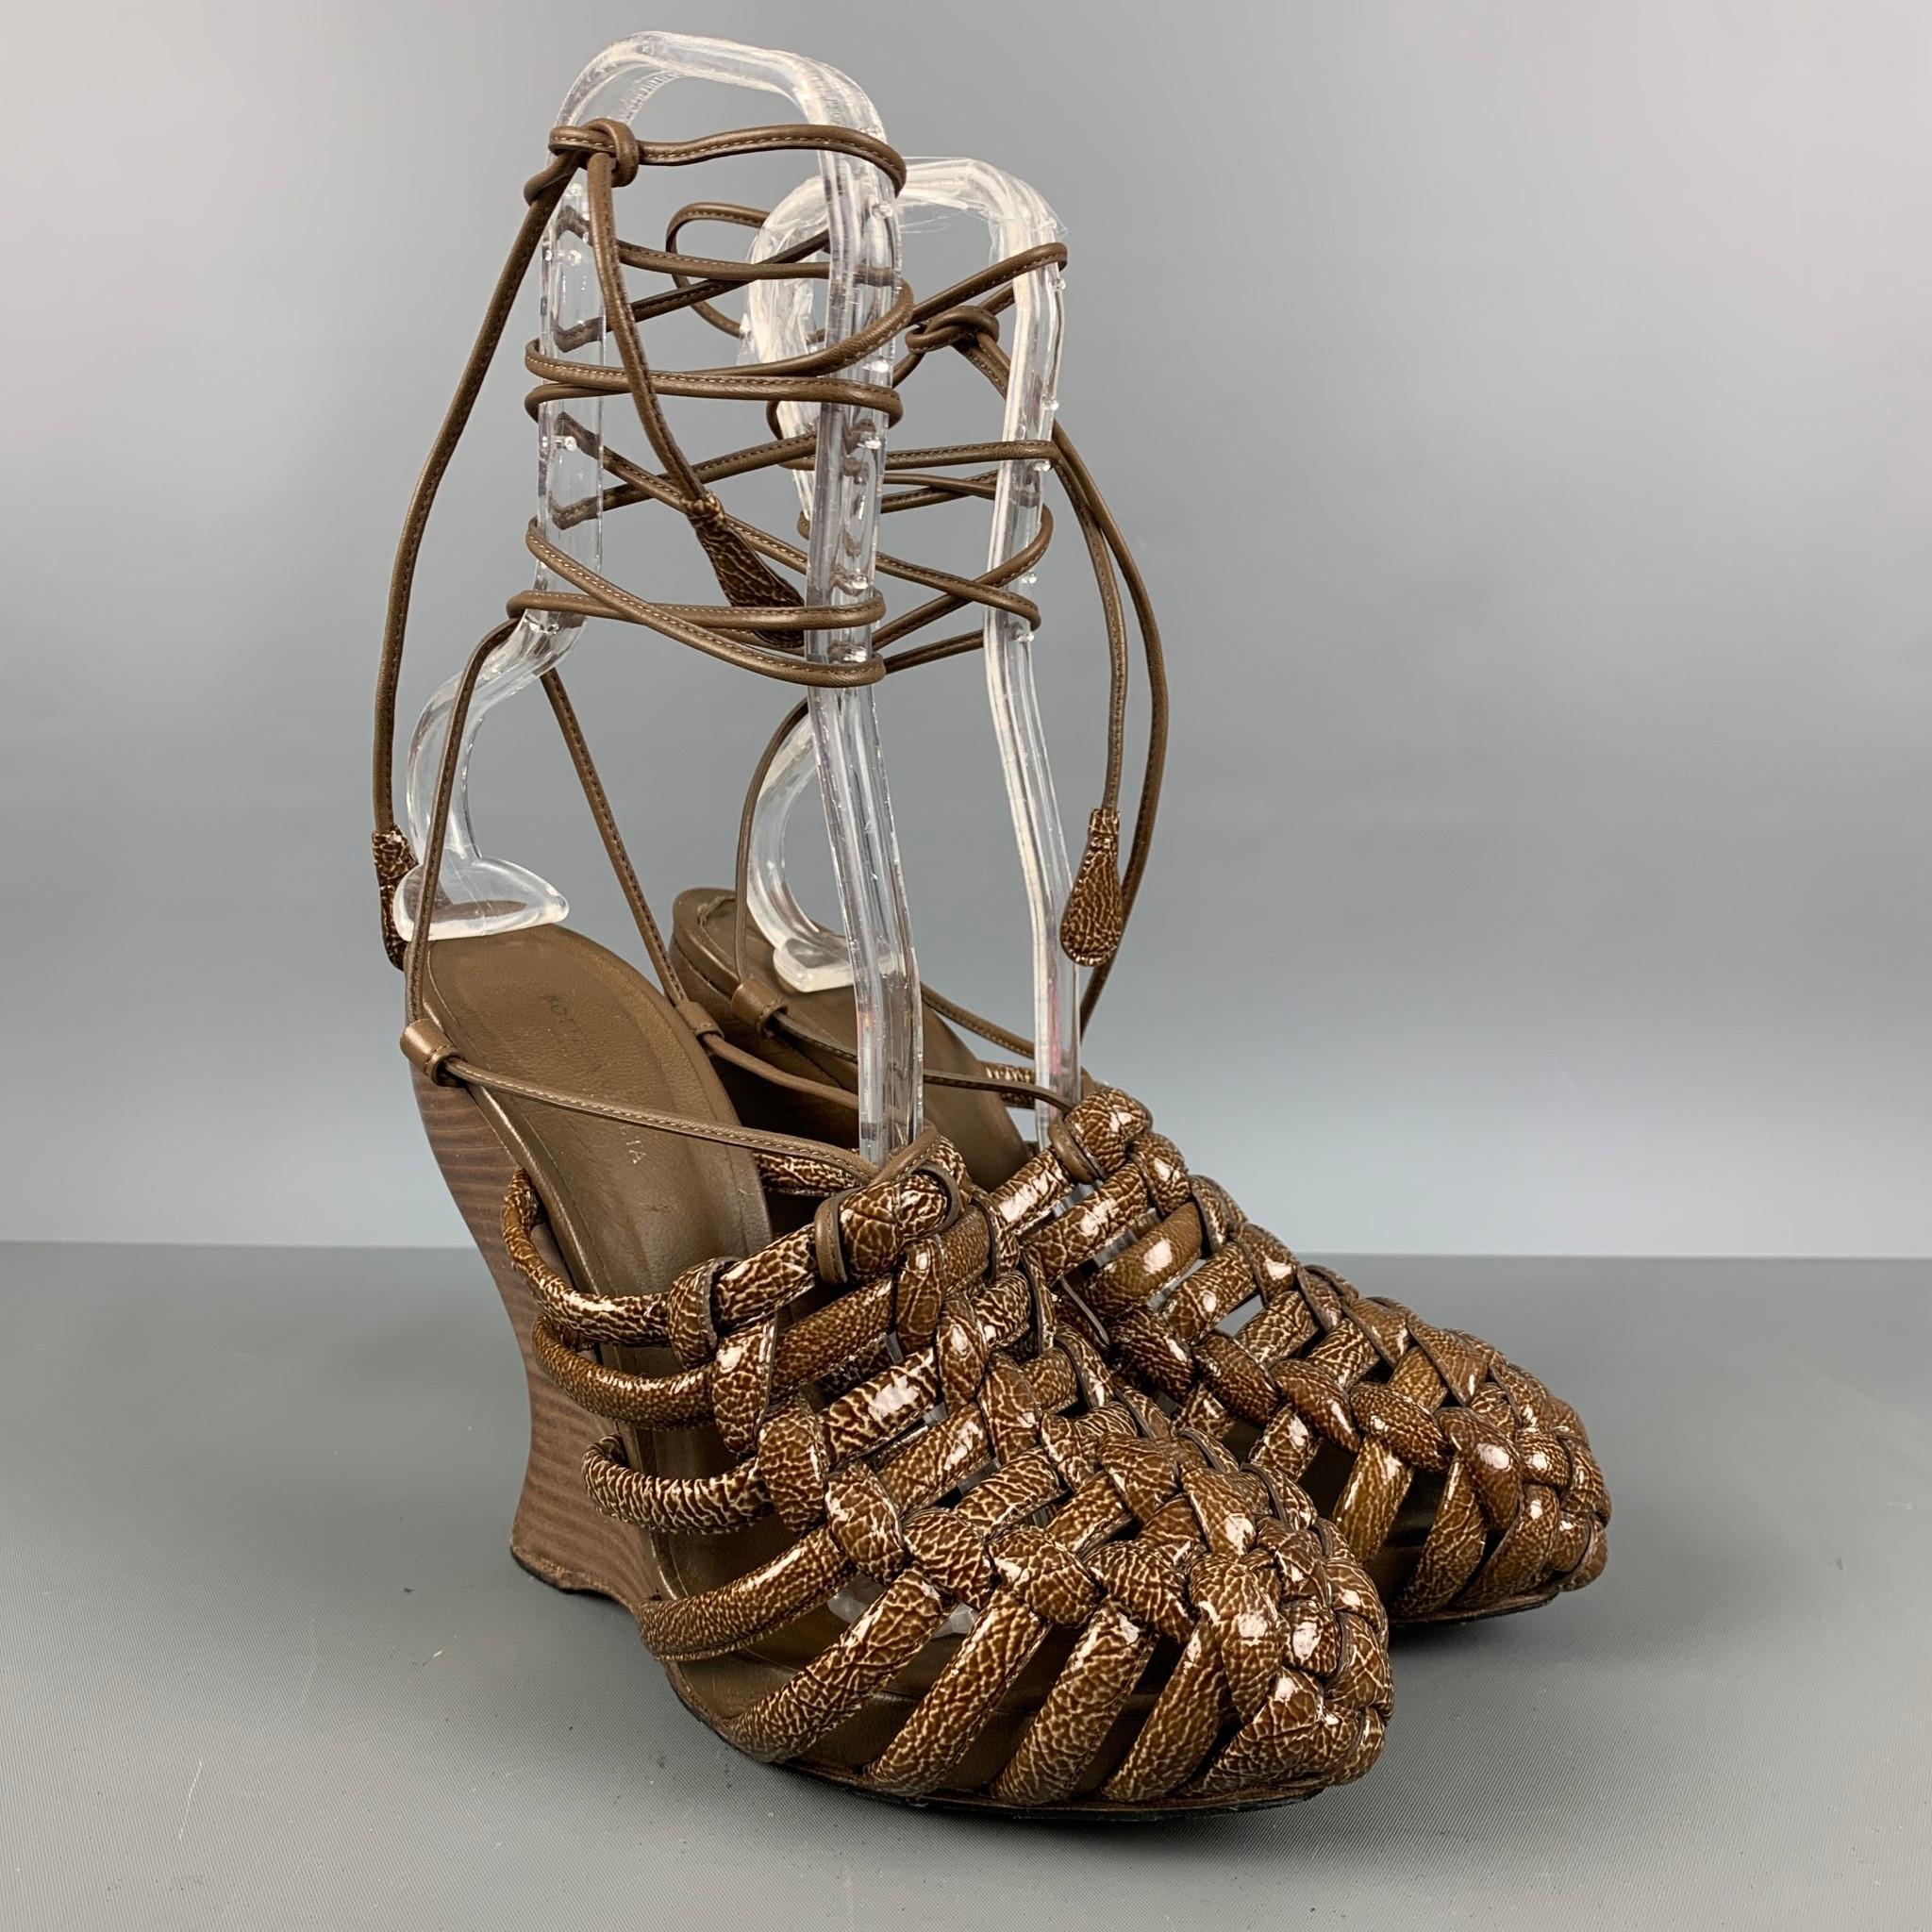 BOTTEGA VENETA wedge sandals comes in a brown and olive patent leather featuring a pointed toe, and an ankle strap.

Very Good Pre-Owned Conditions.
Marked: 38 1/2

Measurements:

Heel: 5 in.
Platform: 0.75 in.  

SKU: 124570
Category: Sandals

More